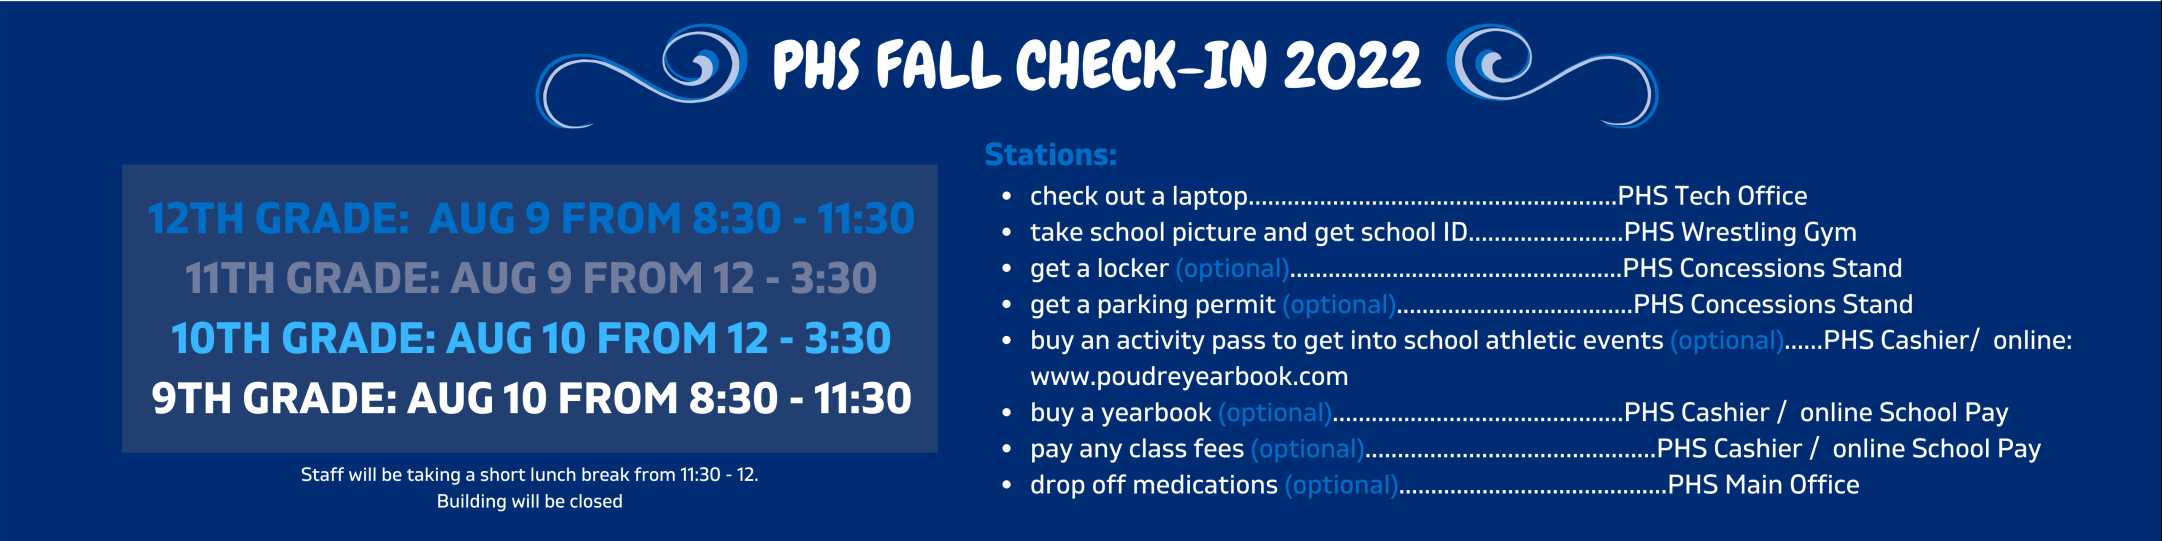 Fall Check-in Banner